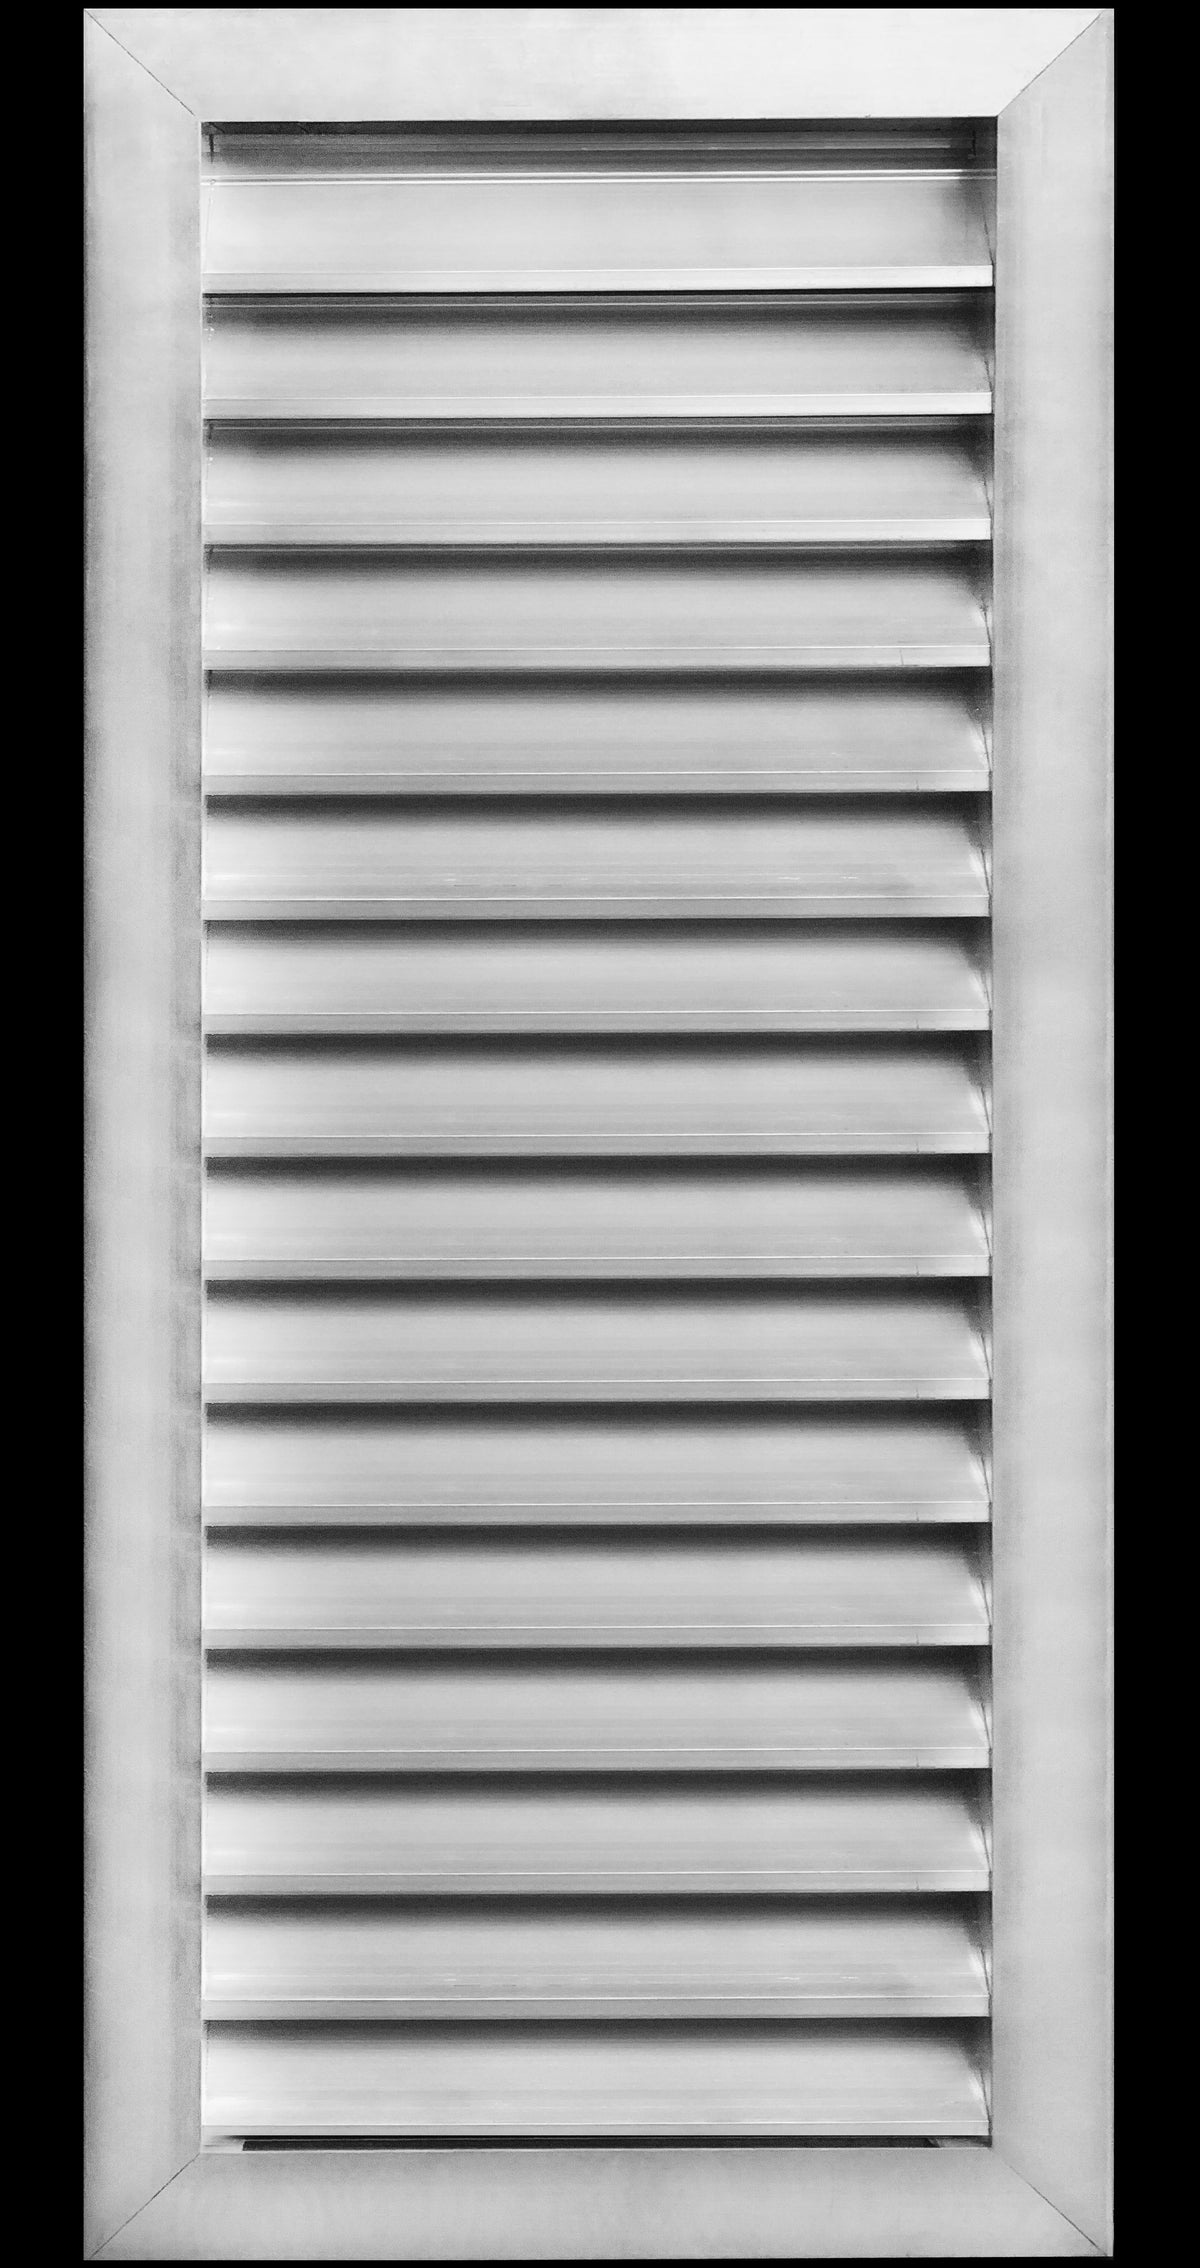 16&quot;w X 36&quot;h Aluminum Outdoor Weather Proof Louvers - Rain &amp; Waterproof Air Vent With Screen Mesh